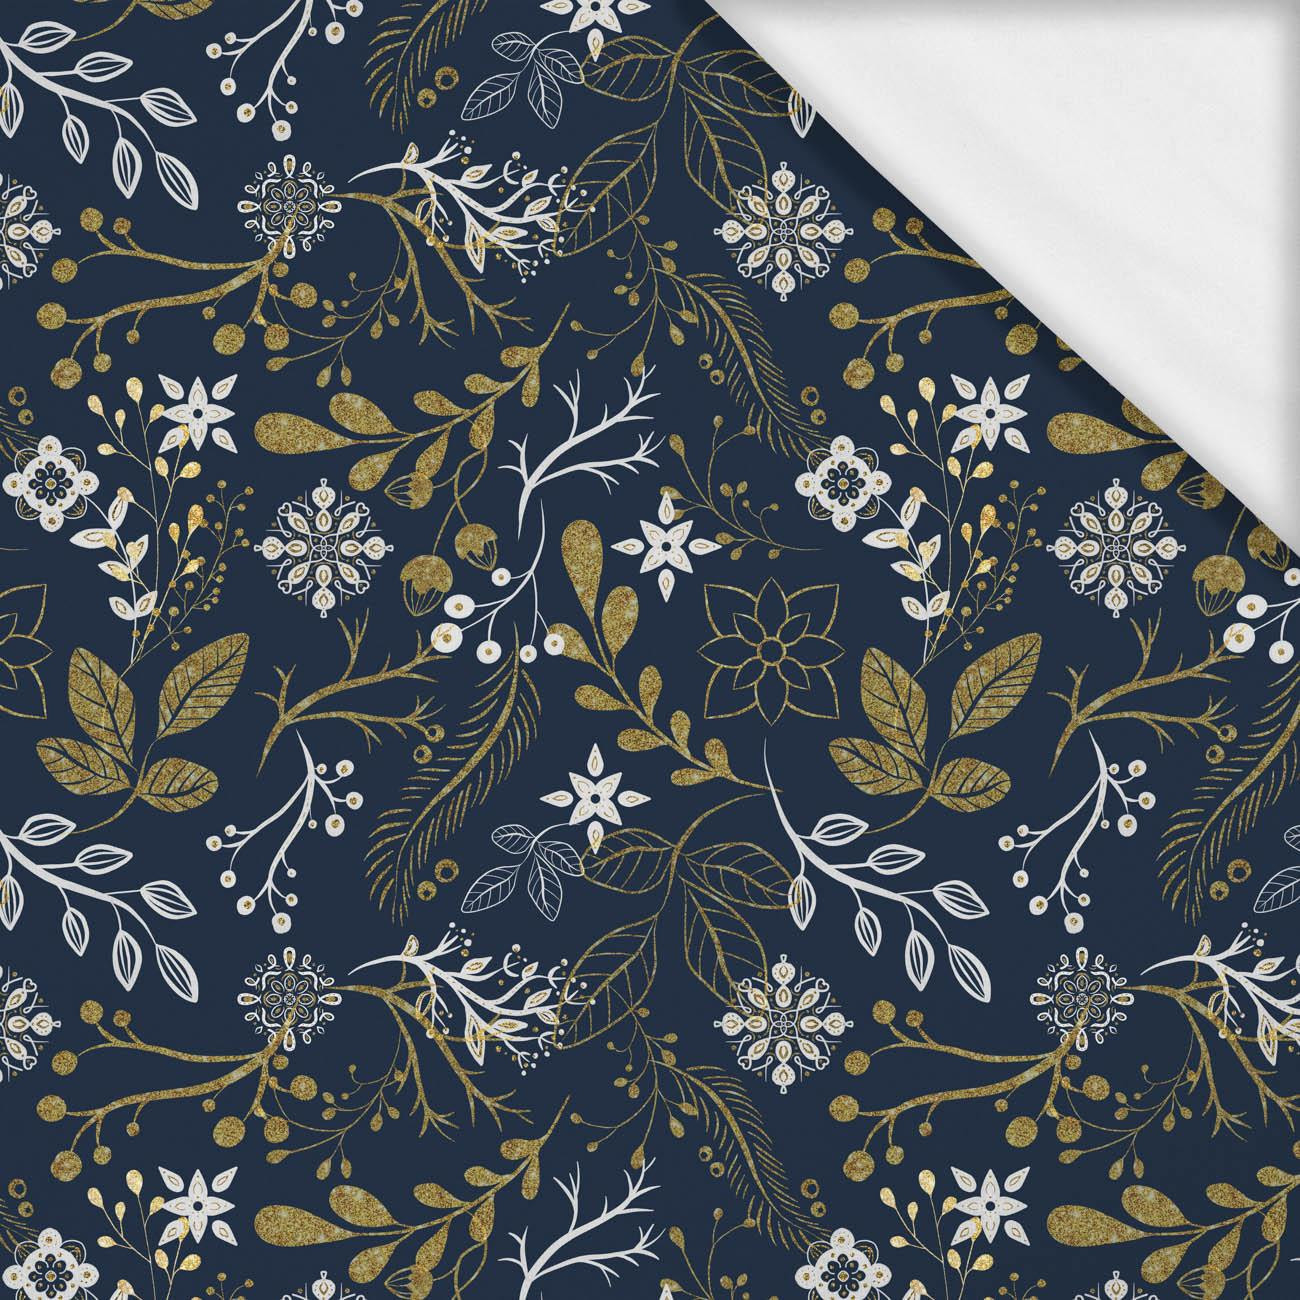 FOLK FLORAL pat. 1 / gold (FOLK FOREST)- single jersey with elastane ITY